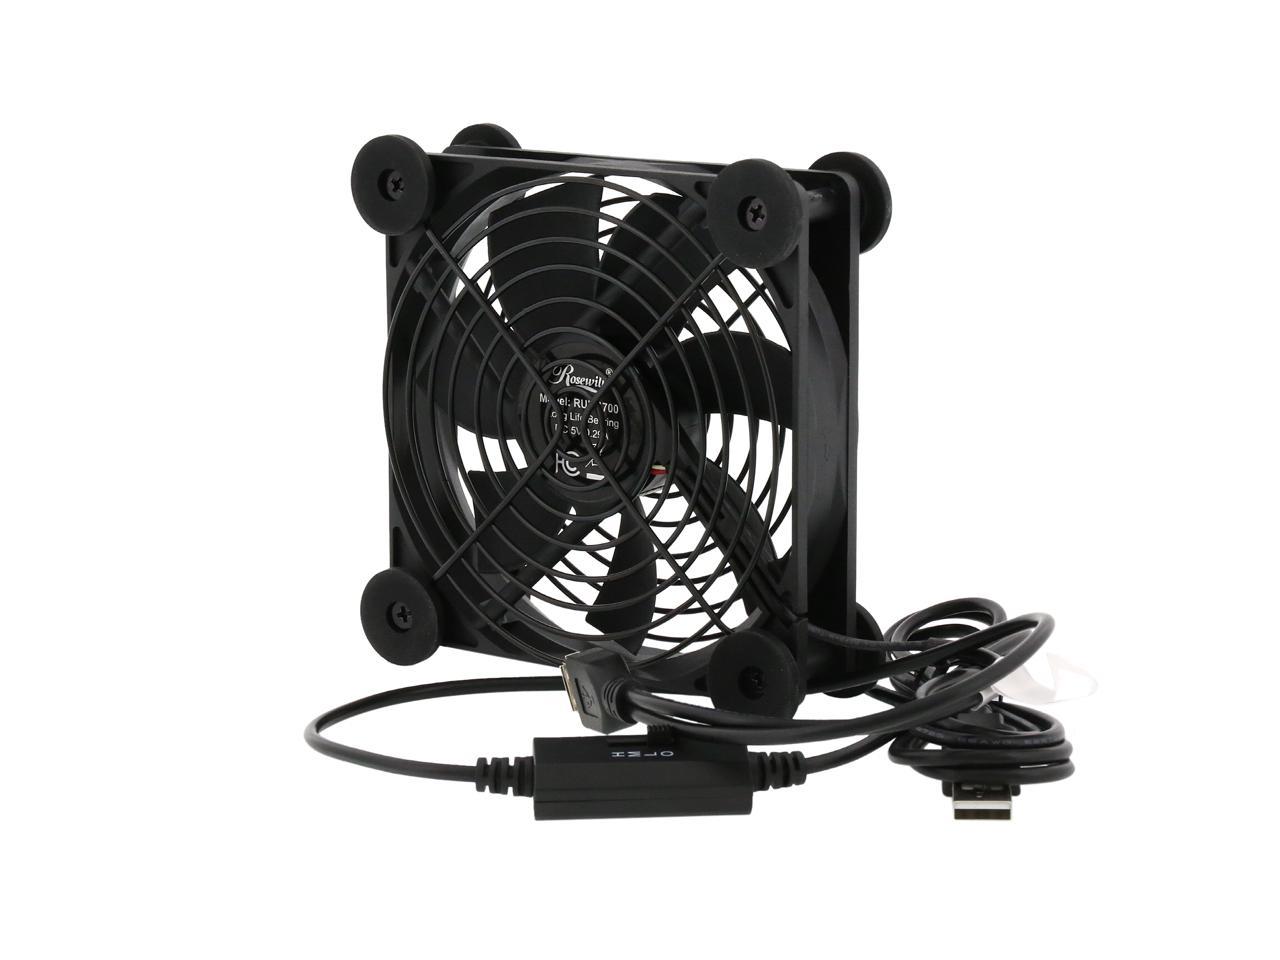 Rosewill 120mm USB Fan with Adjustable Controller - Newegg.com